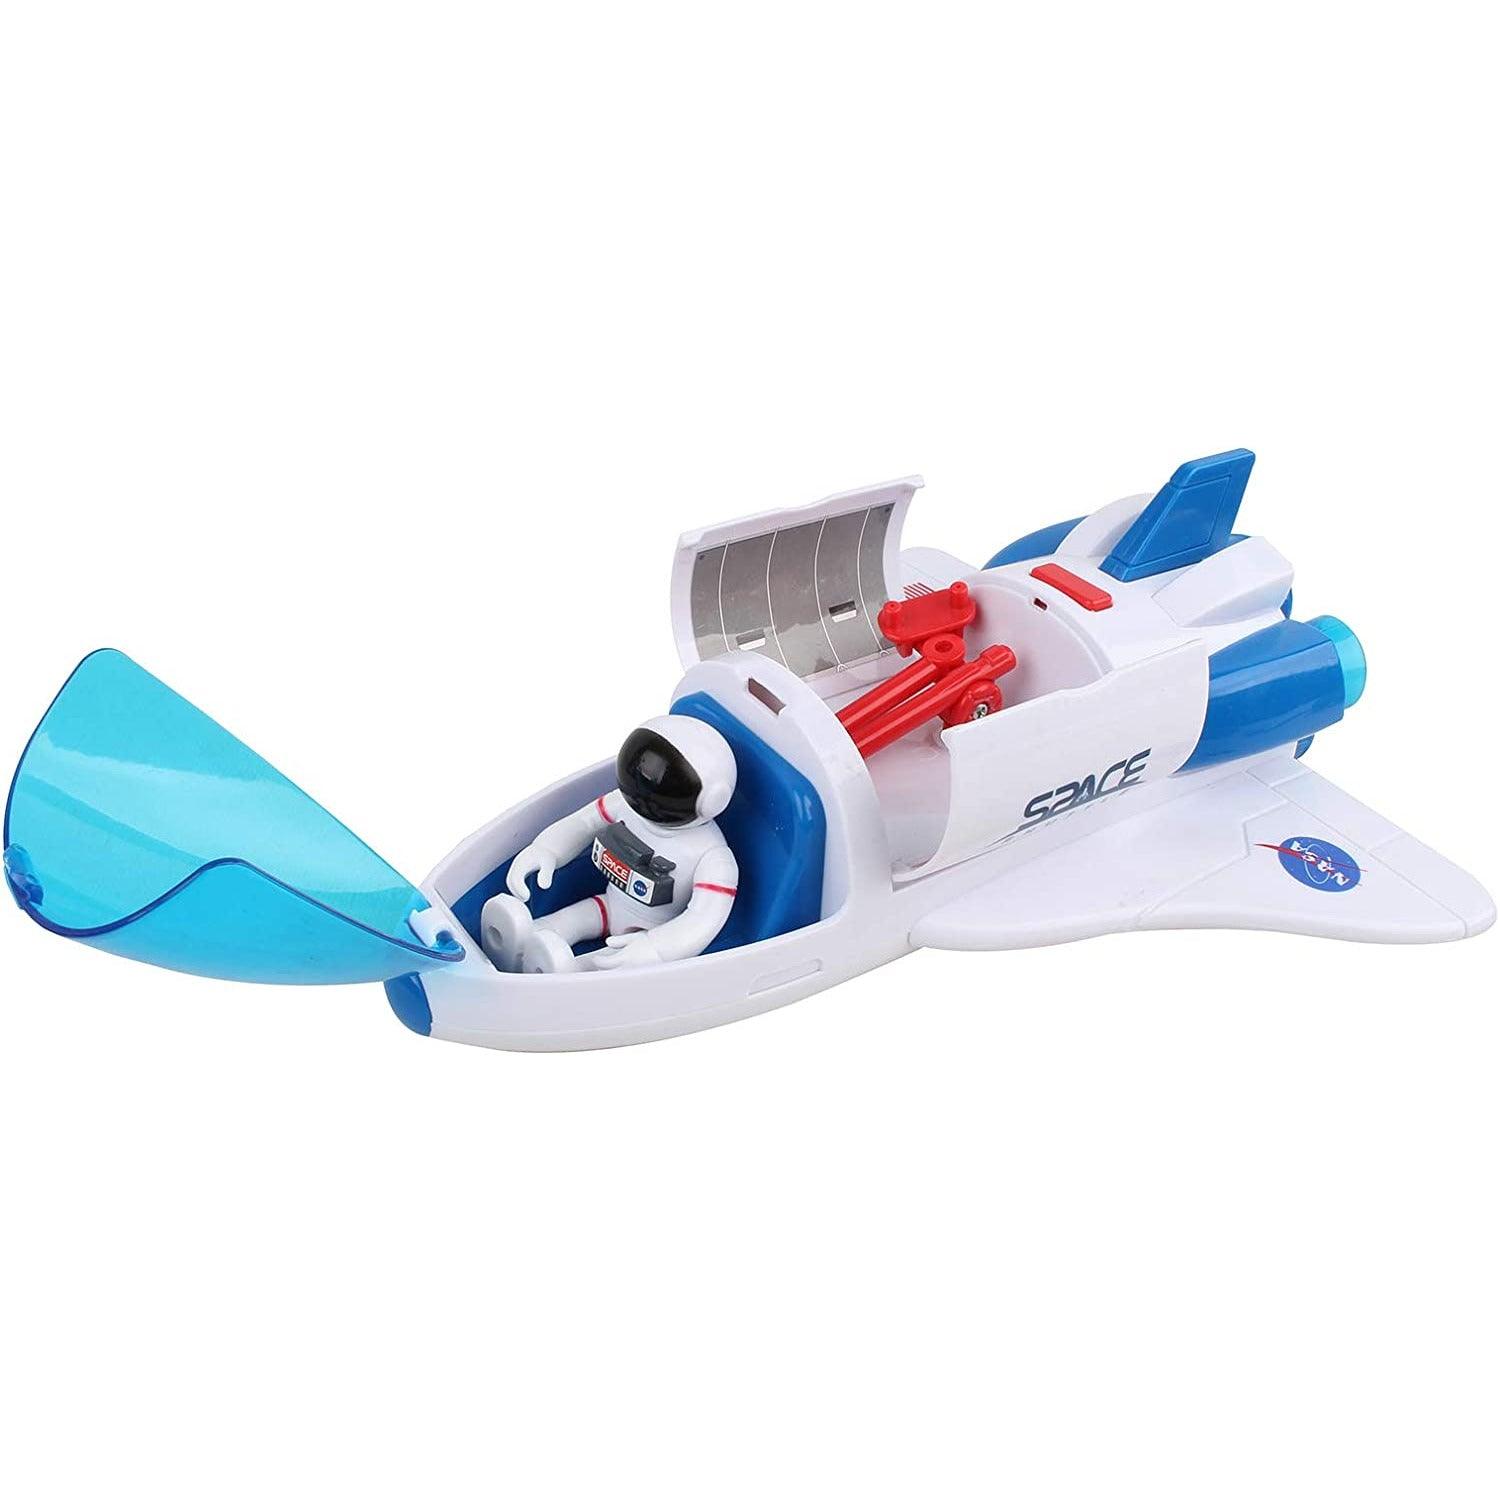 Daron NASA Space Adventure Series: Space Shuttle with Lights & Sounds & Figure, Approx 9